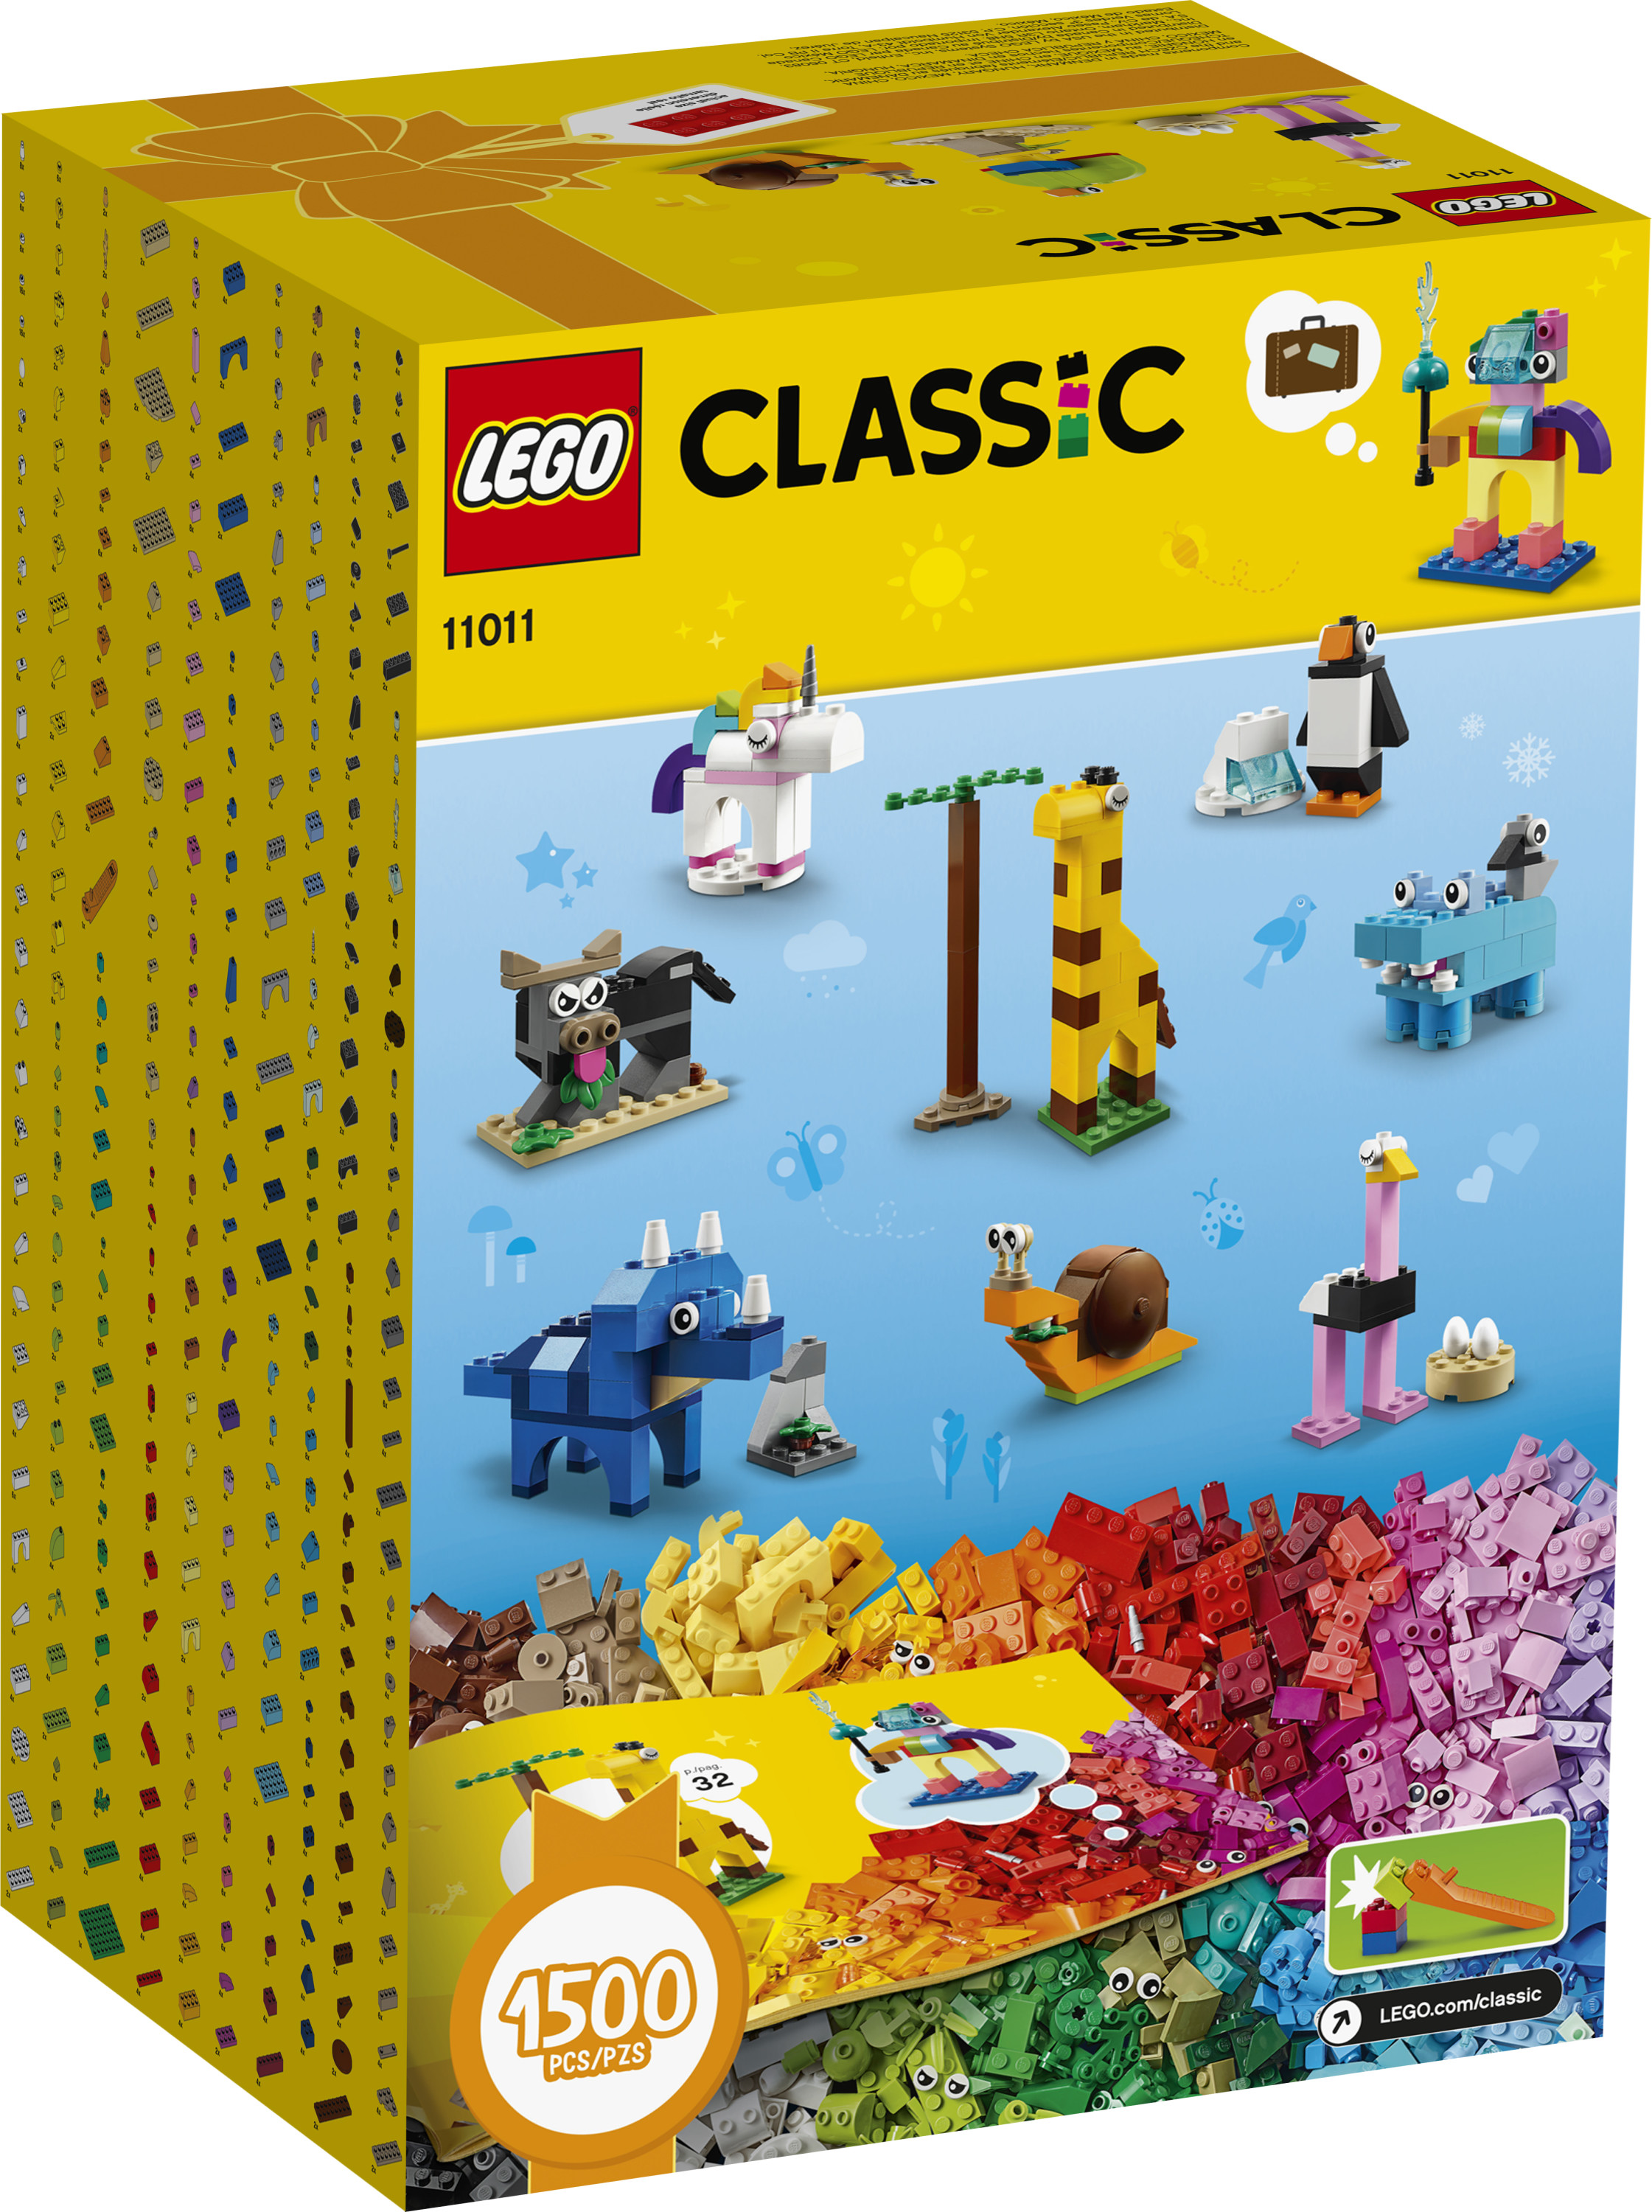 LEGO Classic Bricks and Animals 11011 Creative Toy That Builds into 10 Amazing Animal Figures (1,500 Pieces) - image 4 of 6